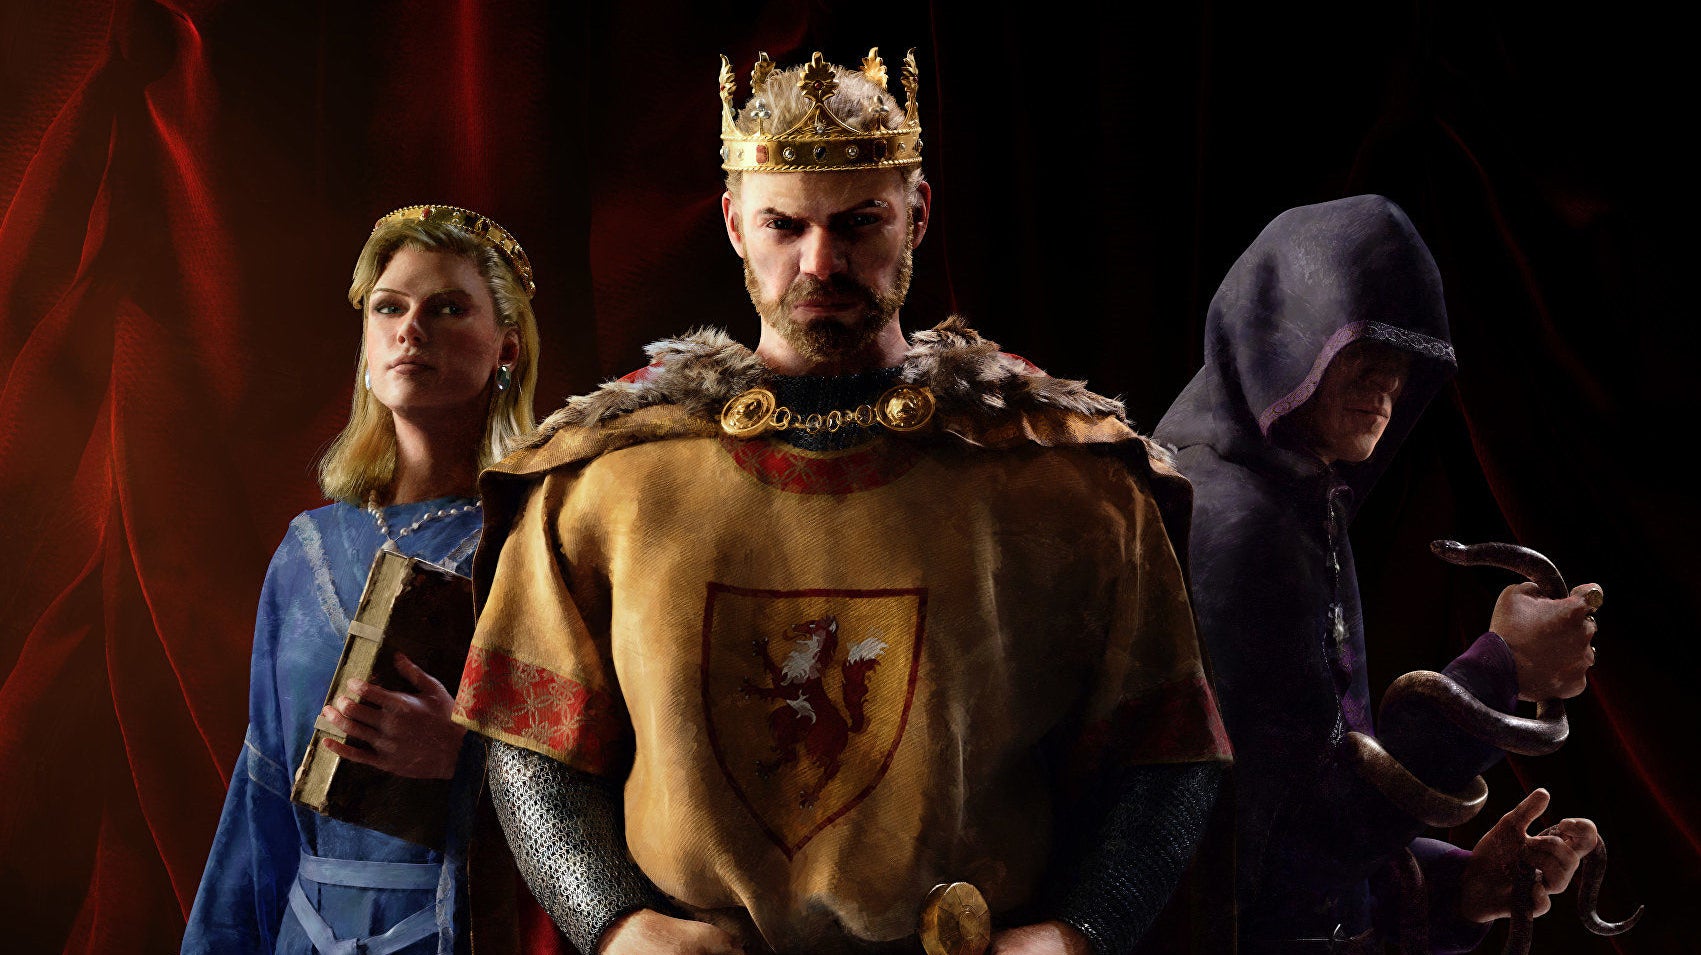 Image for Same-sex marriage coming to Crusader Kings 3